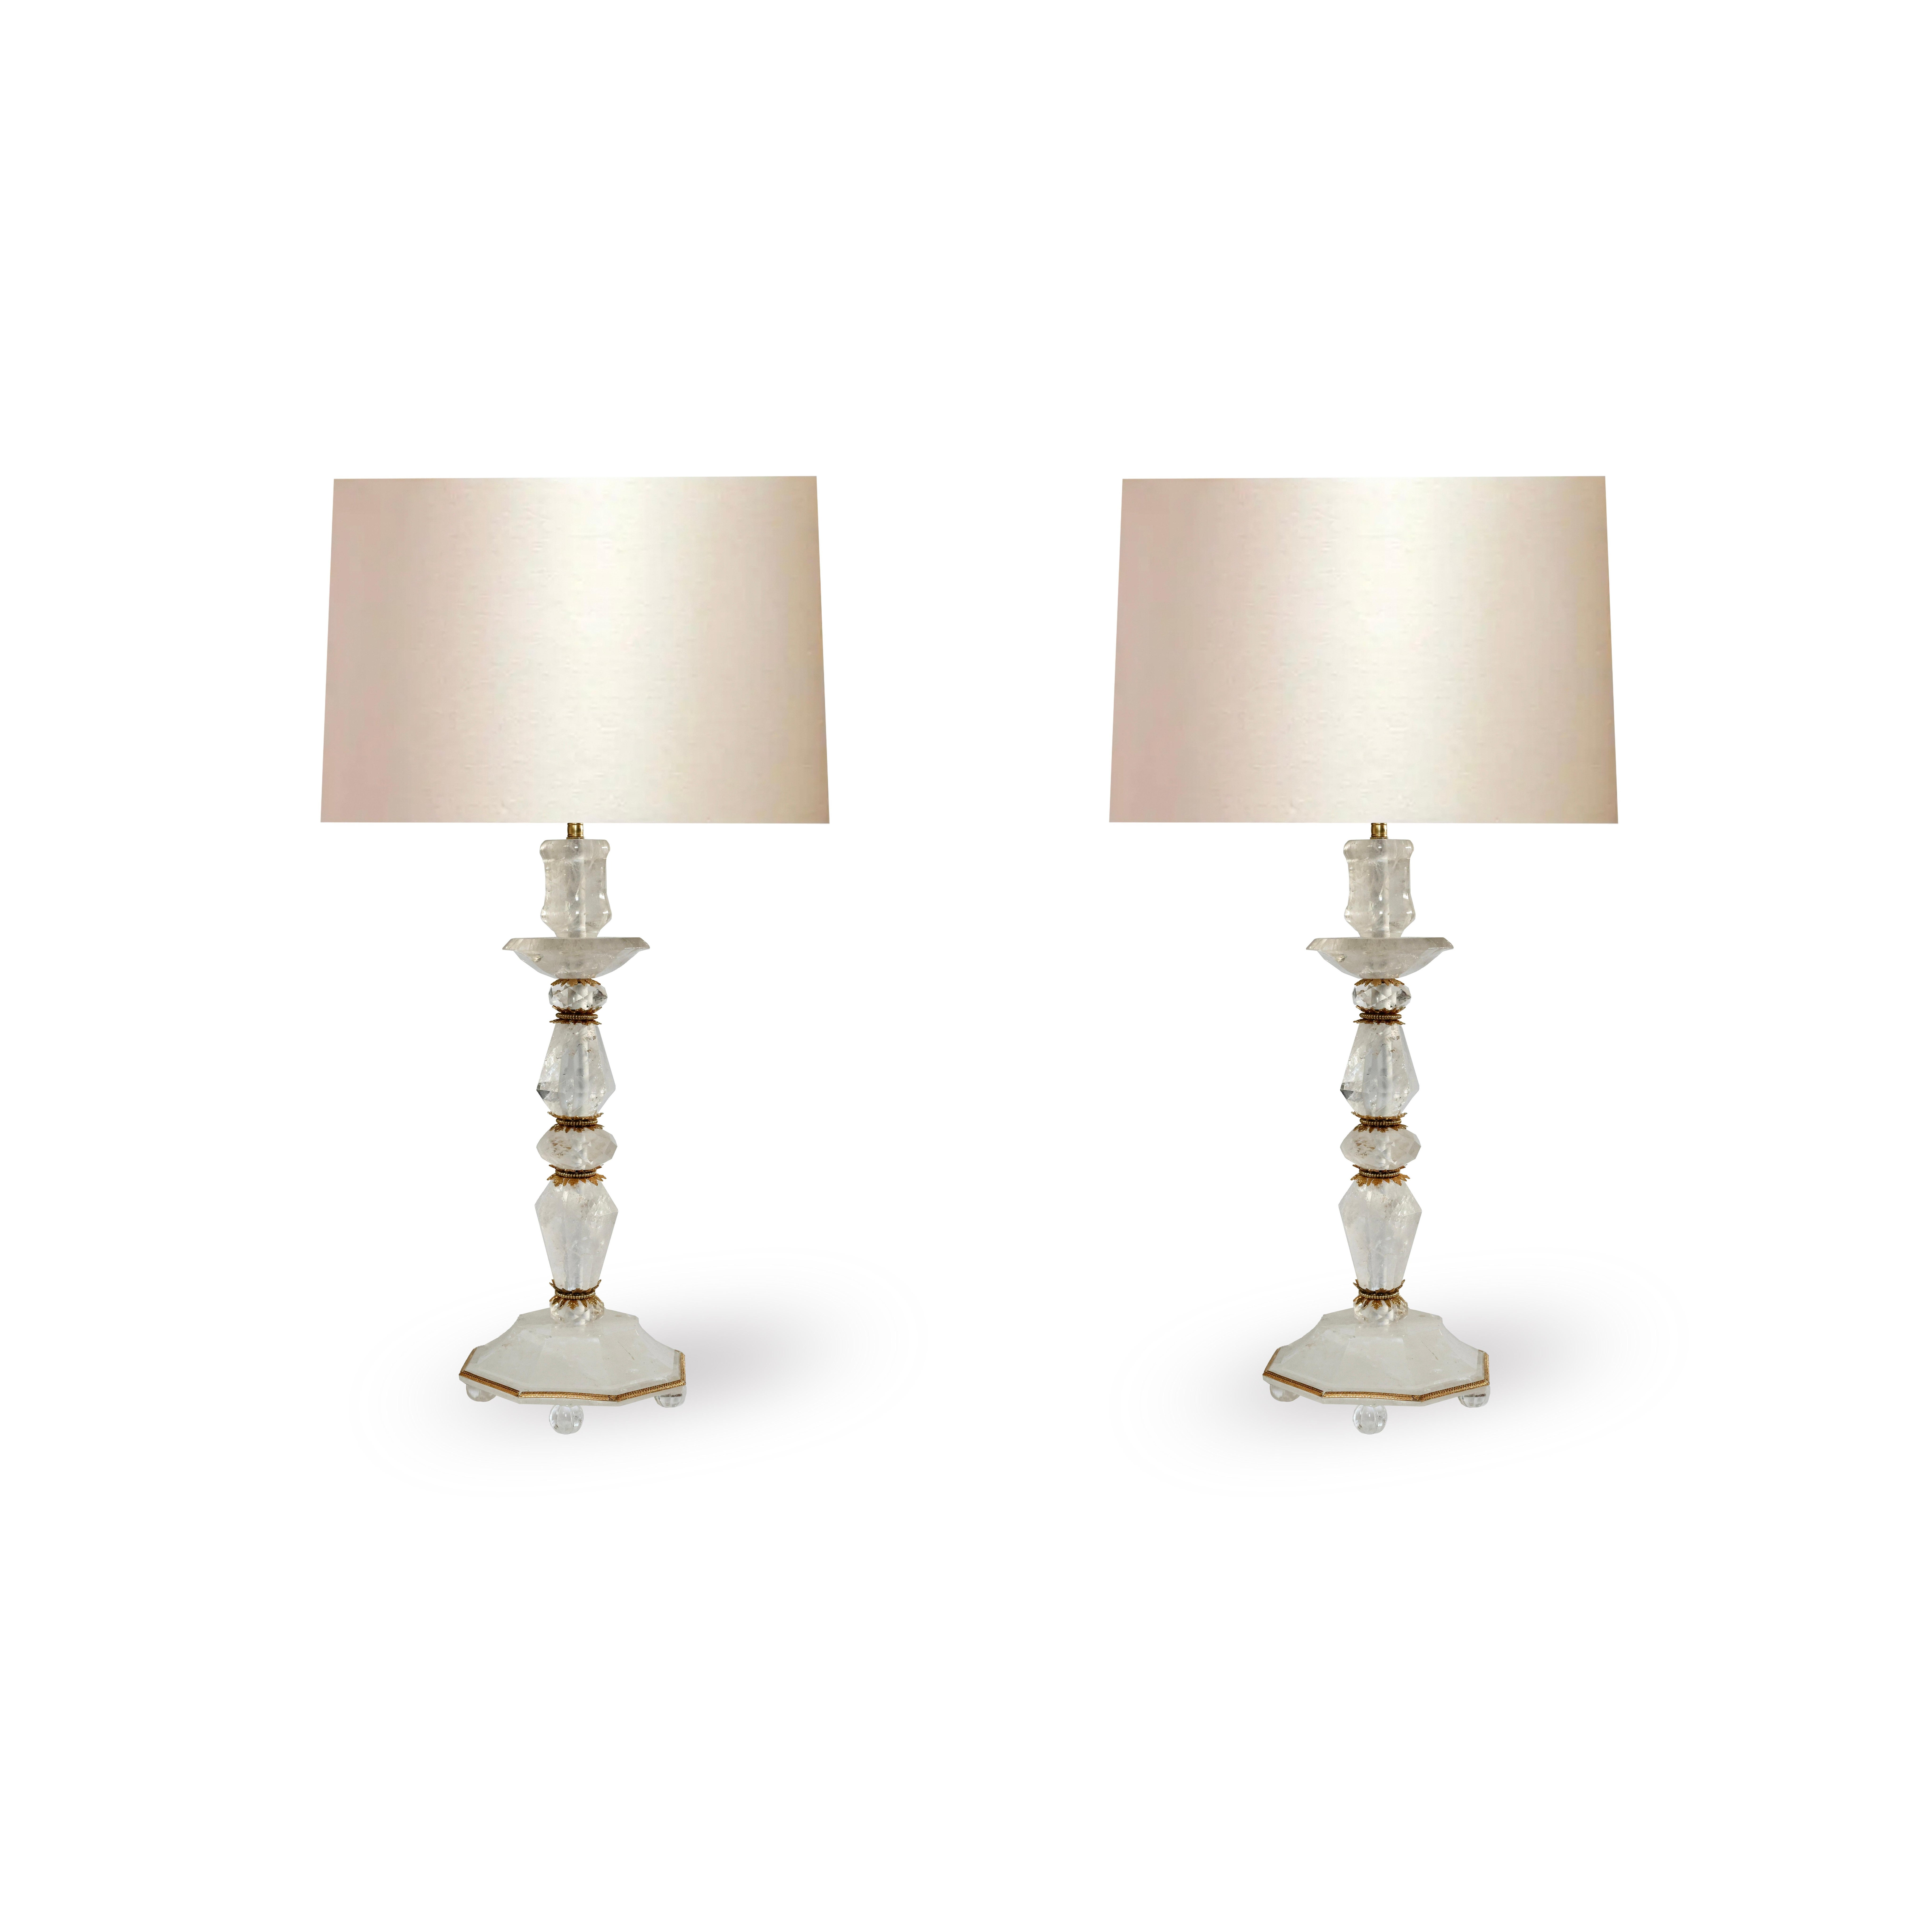 Pair of ormolu mount rock crystal lamps.
To the top of the rock crystal 22.5 inch.
Lampshades are not included.